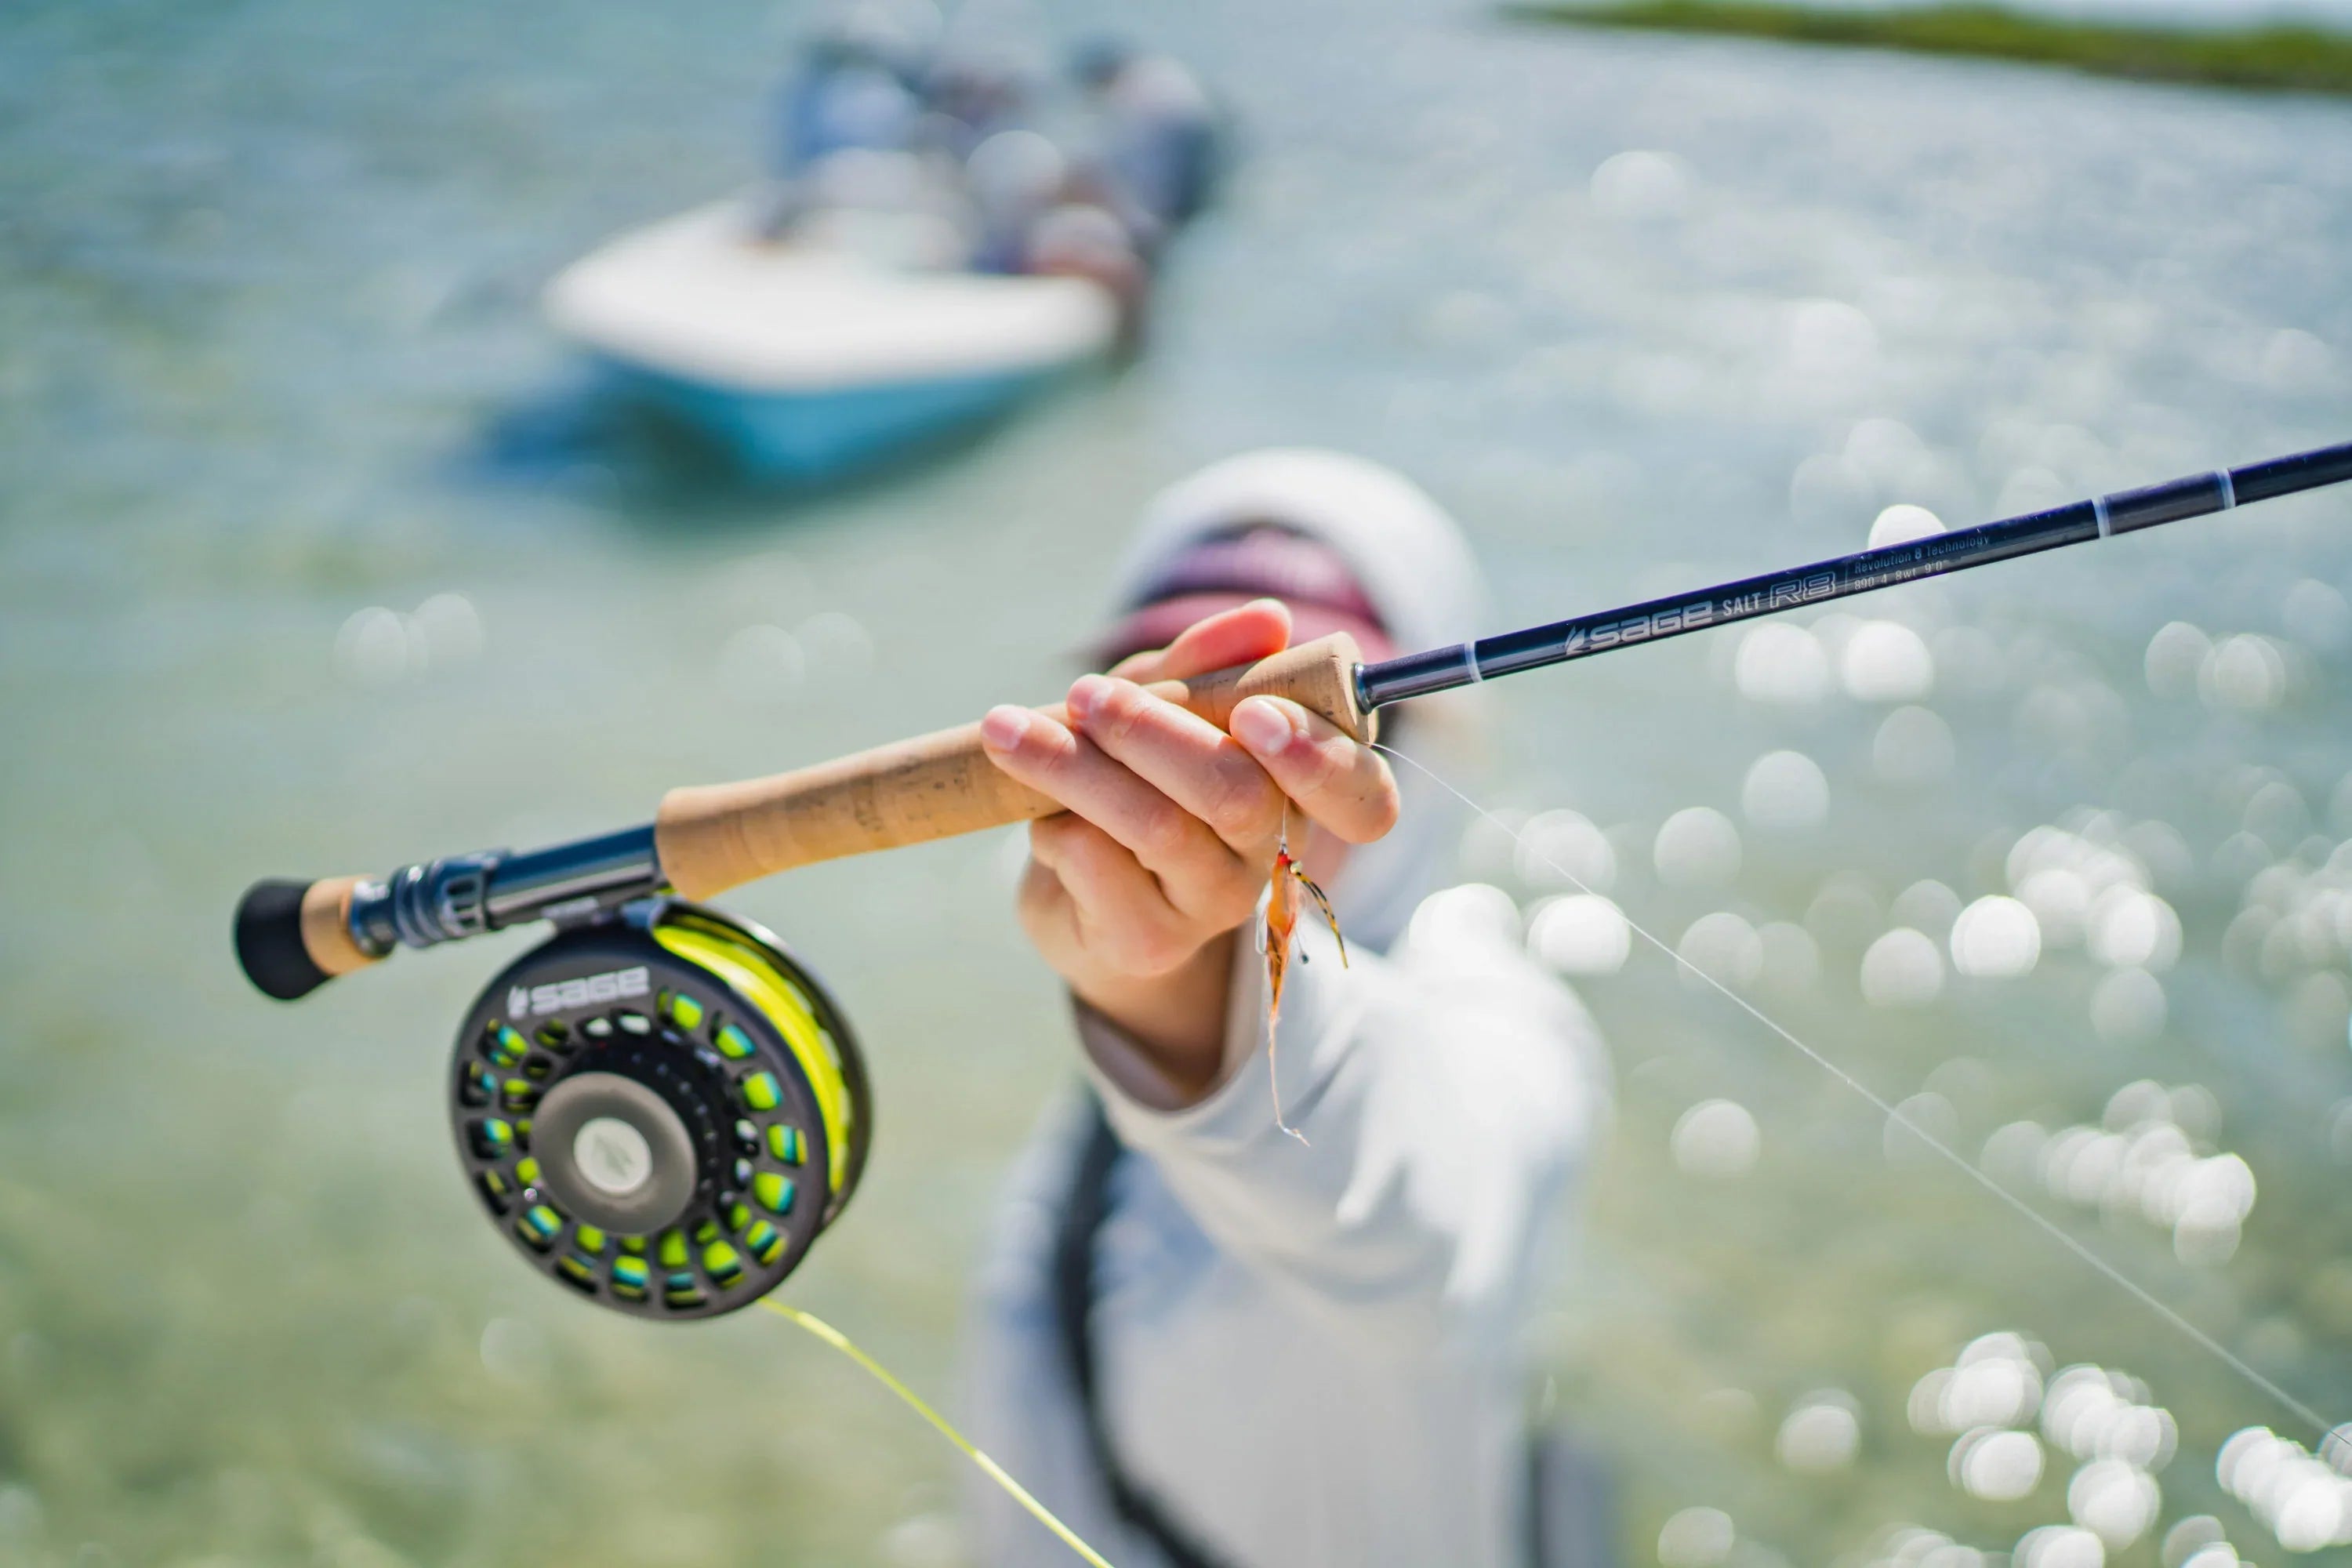 The Saltwater Fly Fishing Shop